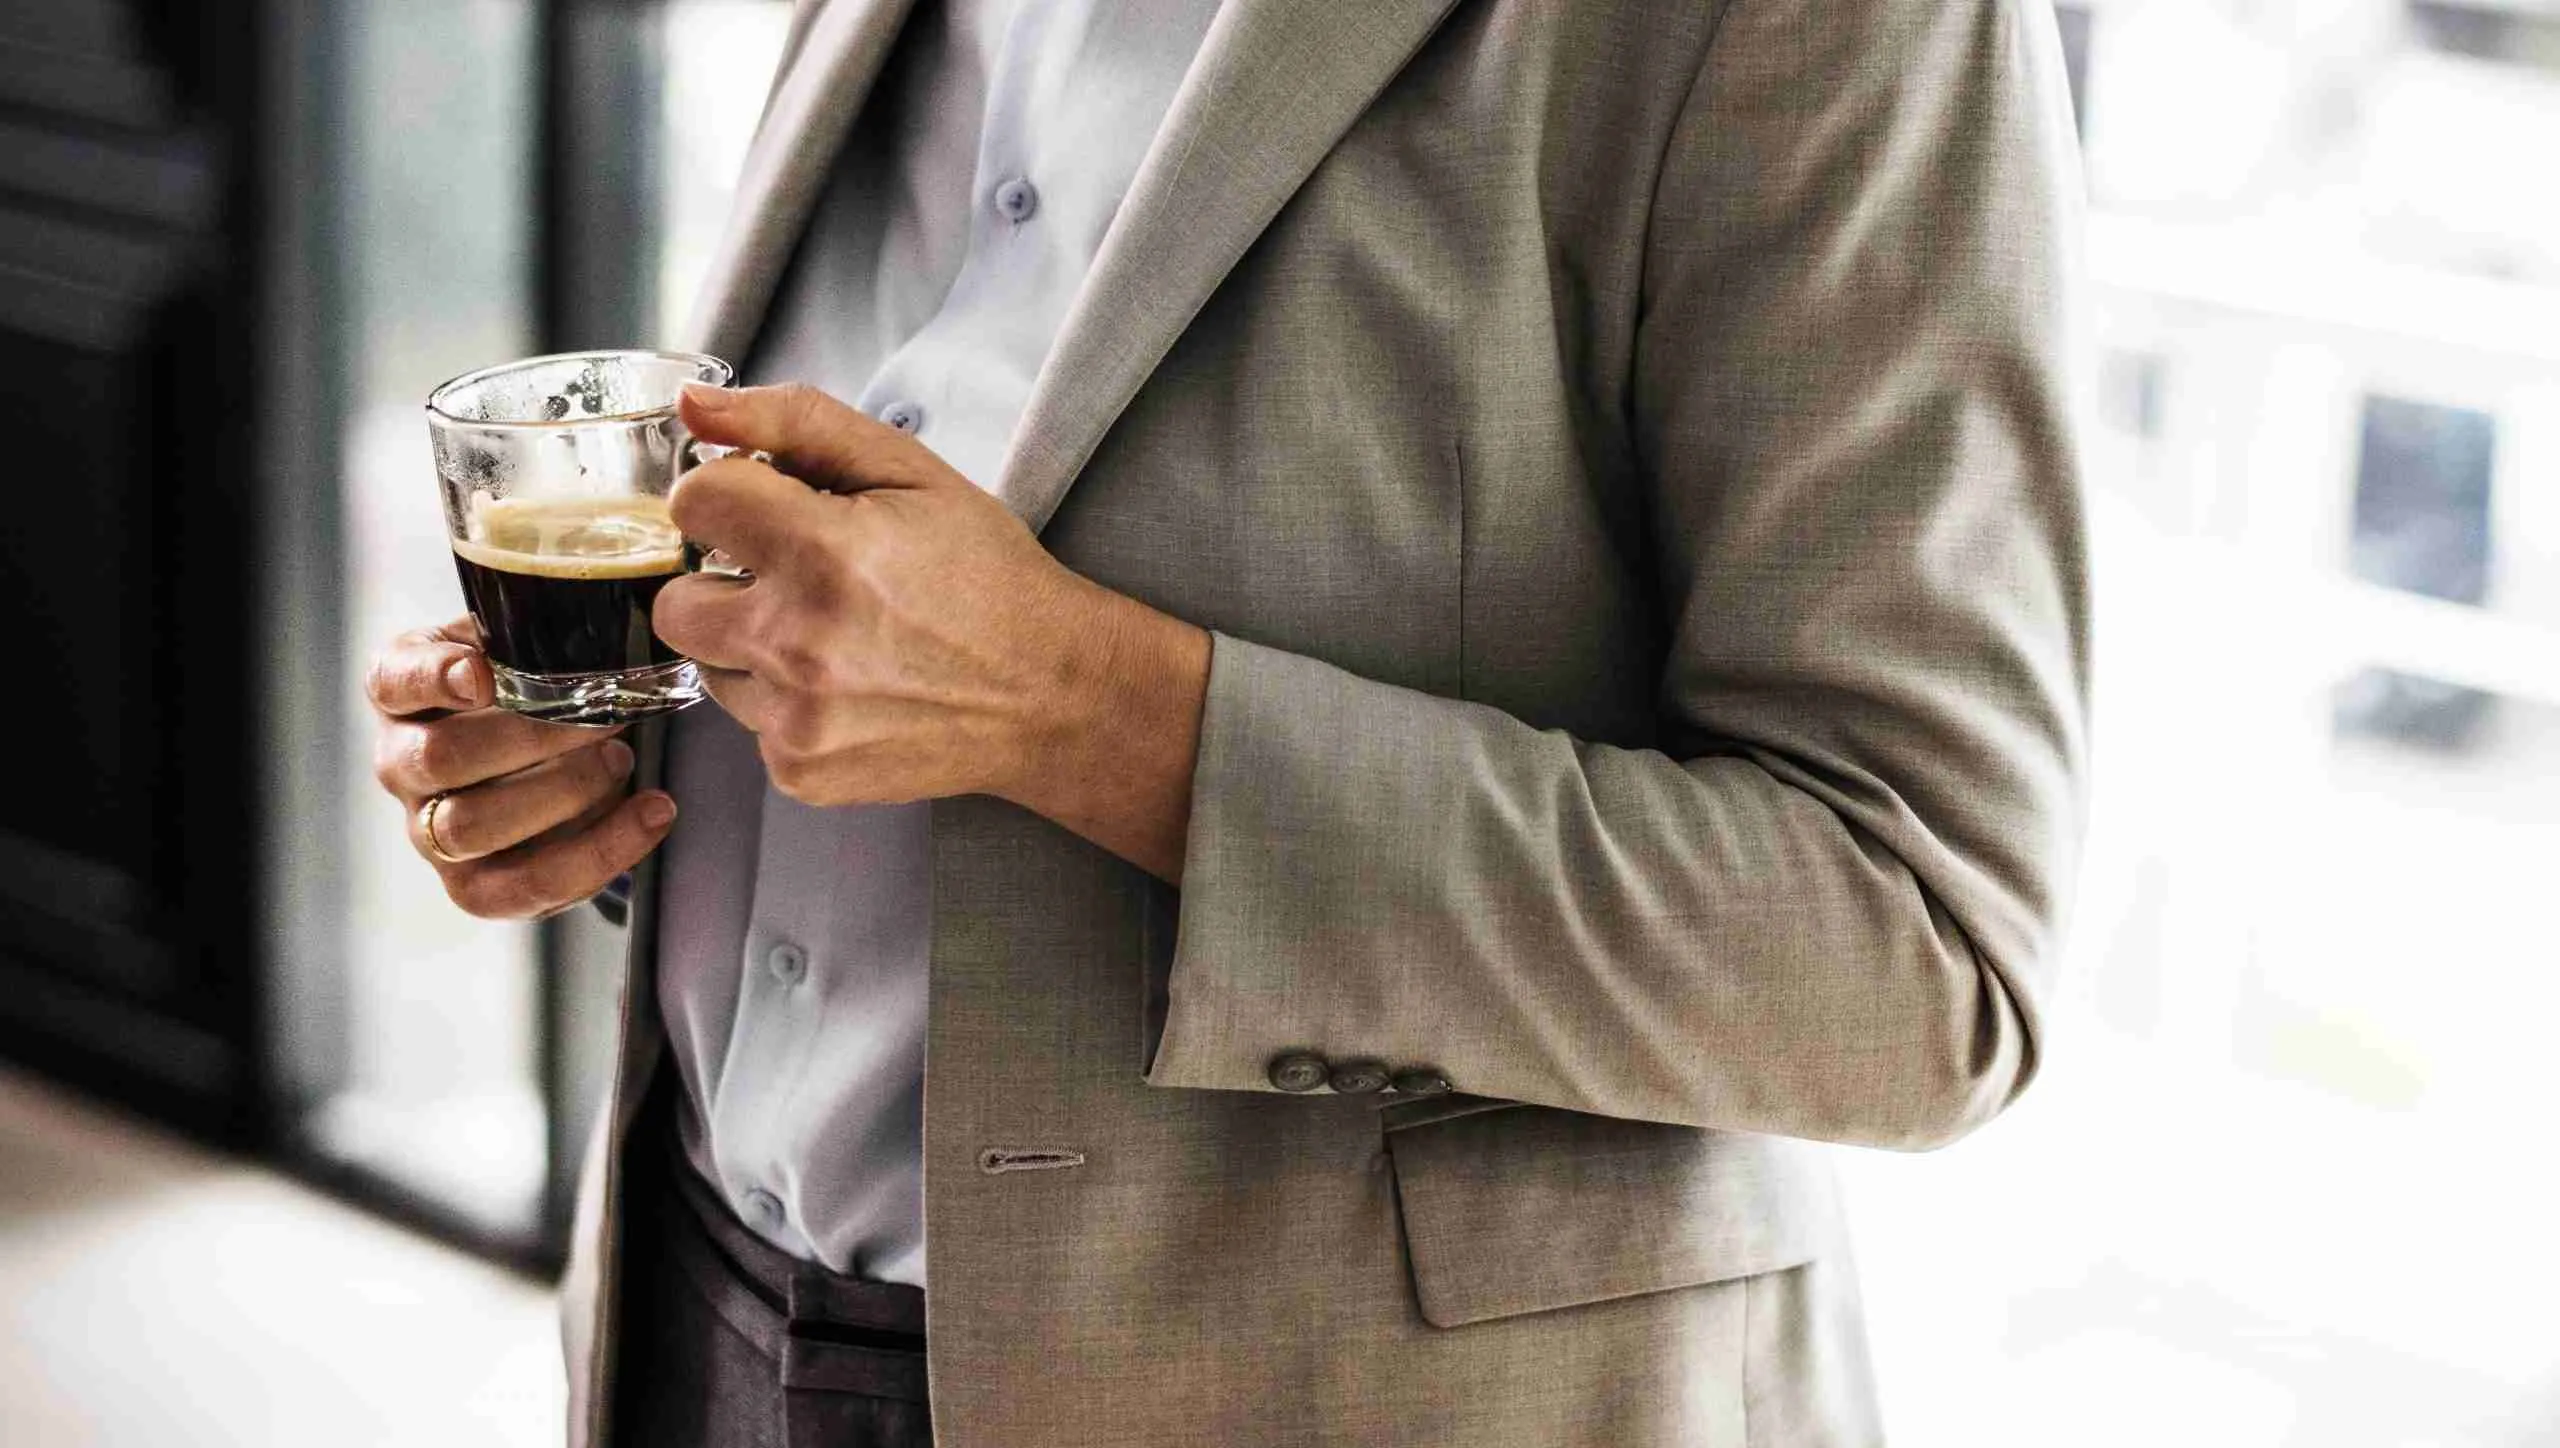 Can Coffee Cause Bloating?